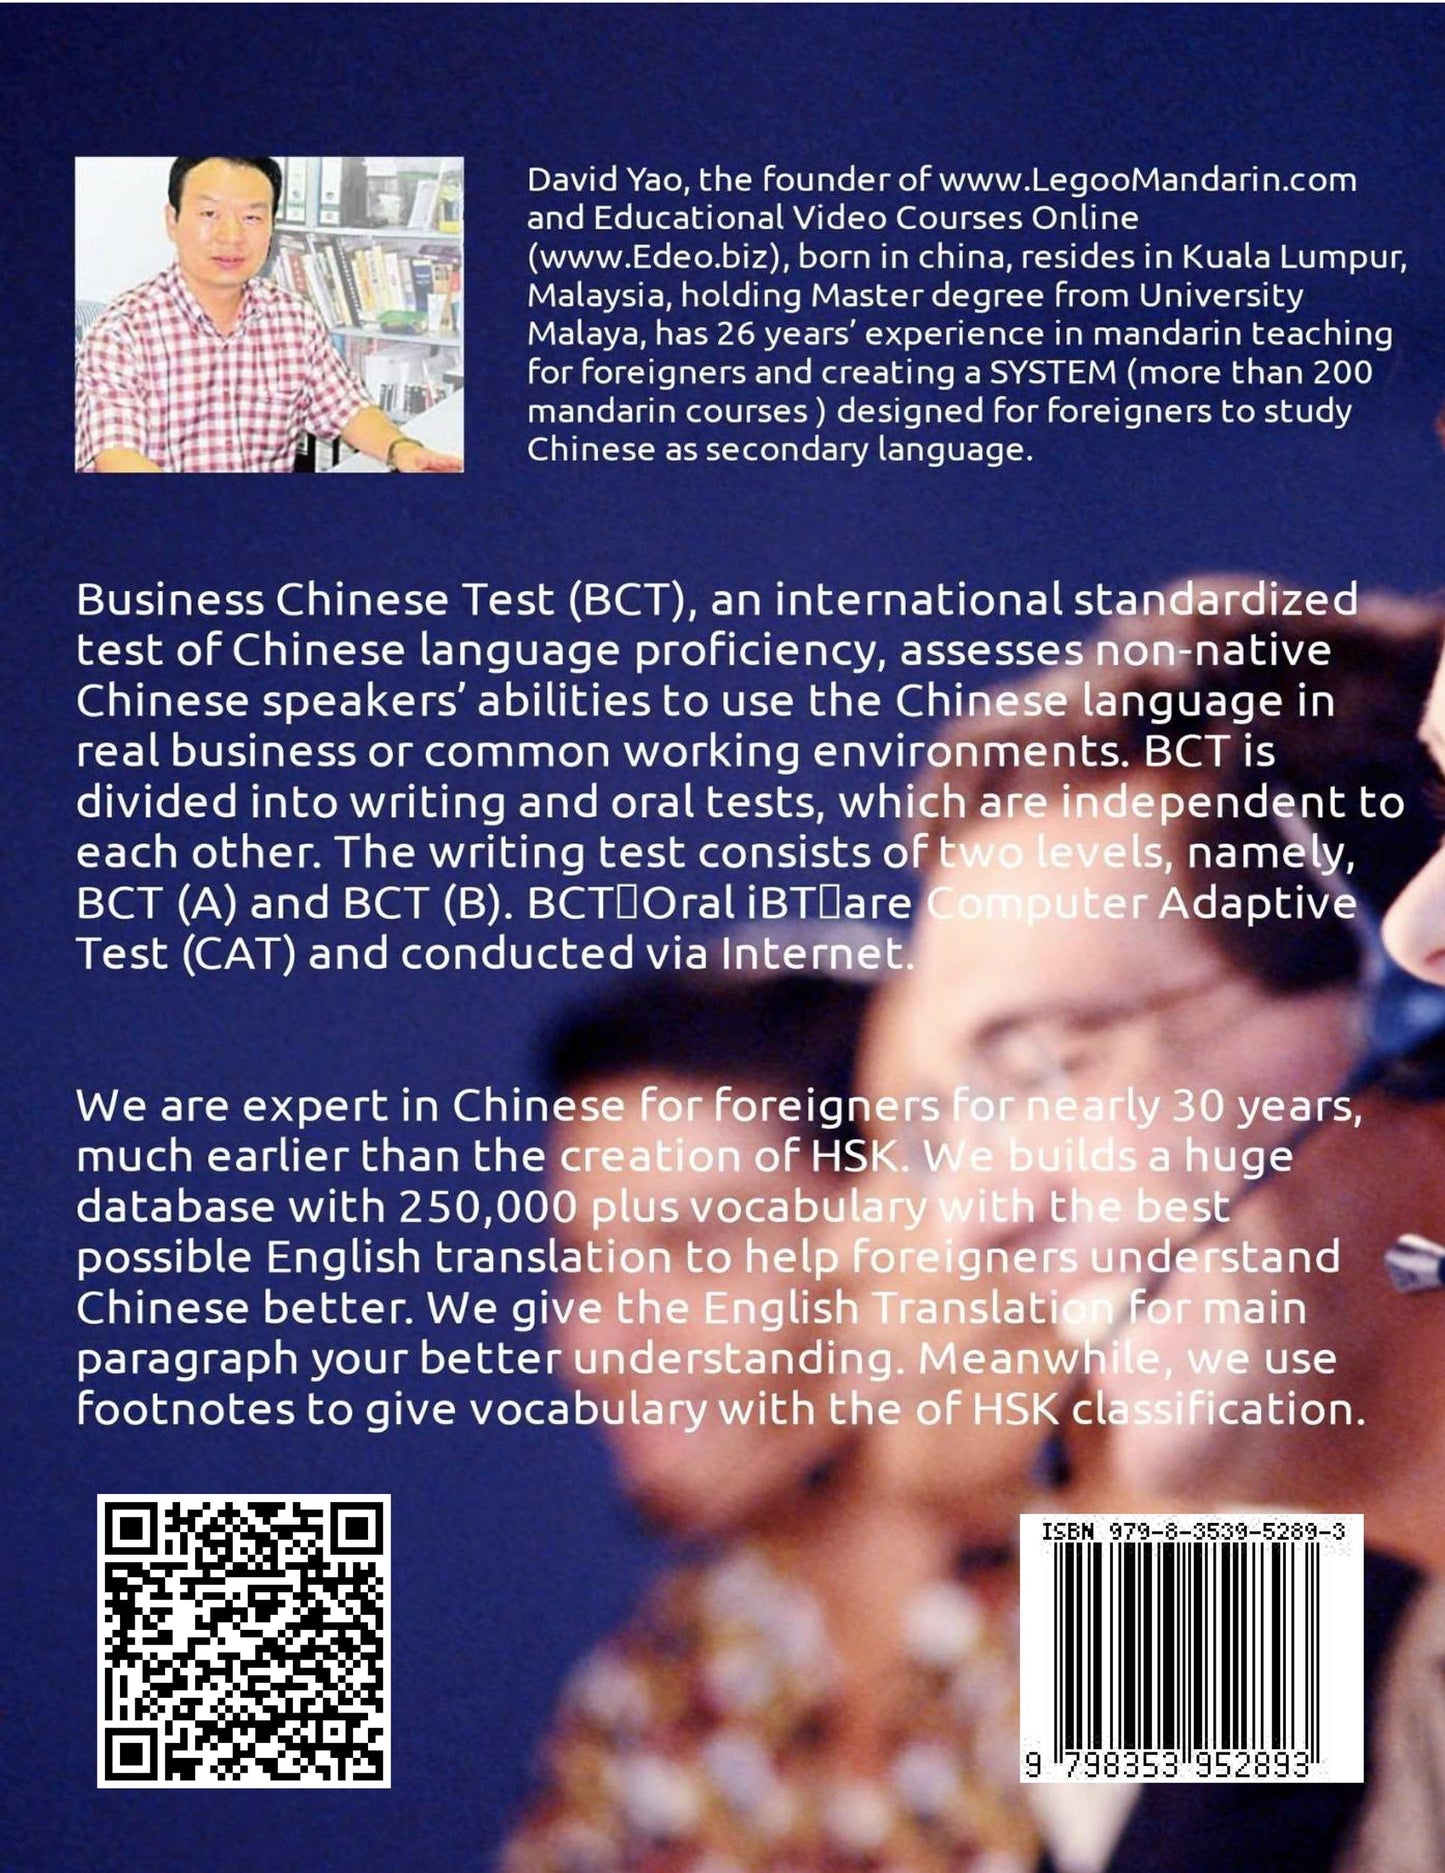 Business Chinese Test (BCT) (A) Intensive Reading for Beginner